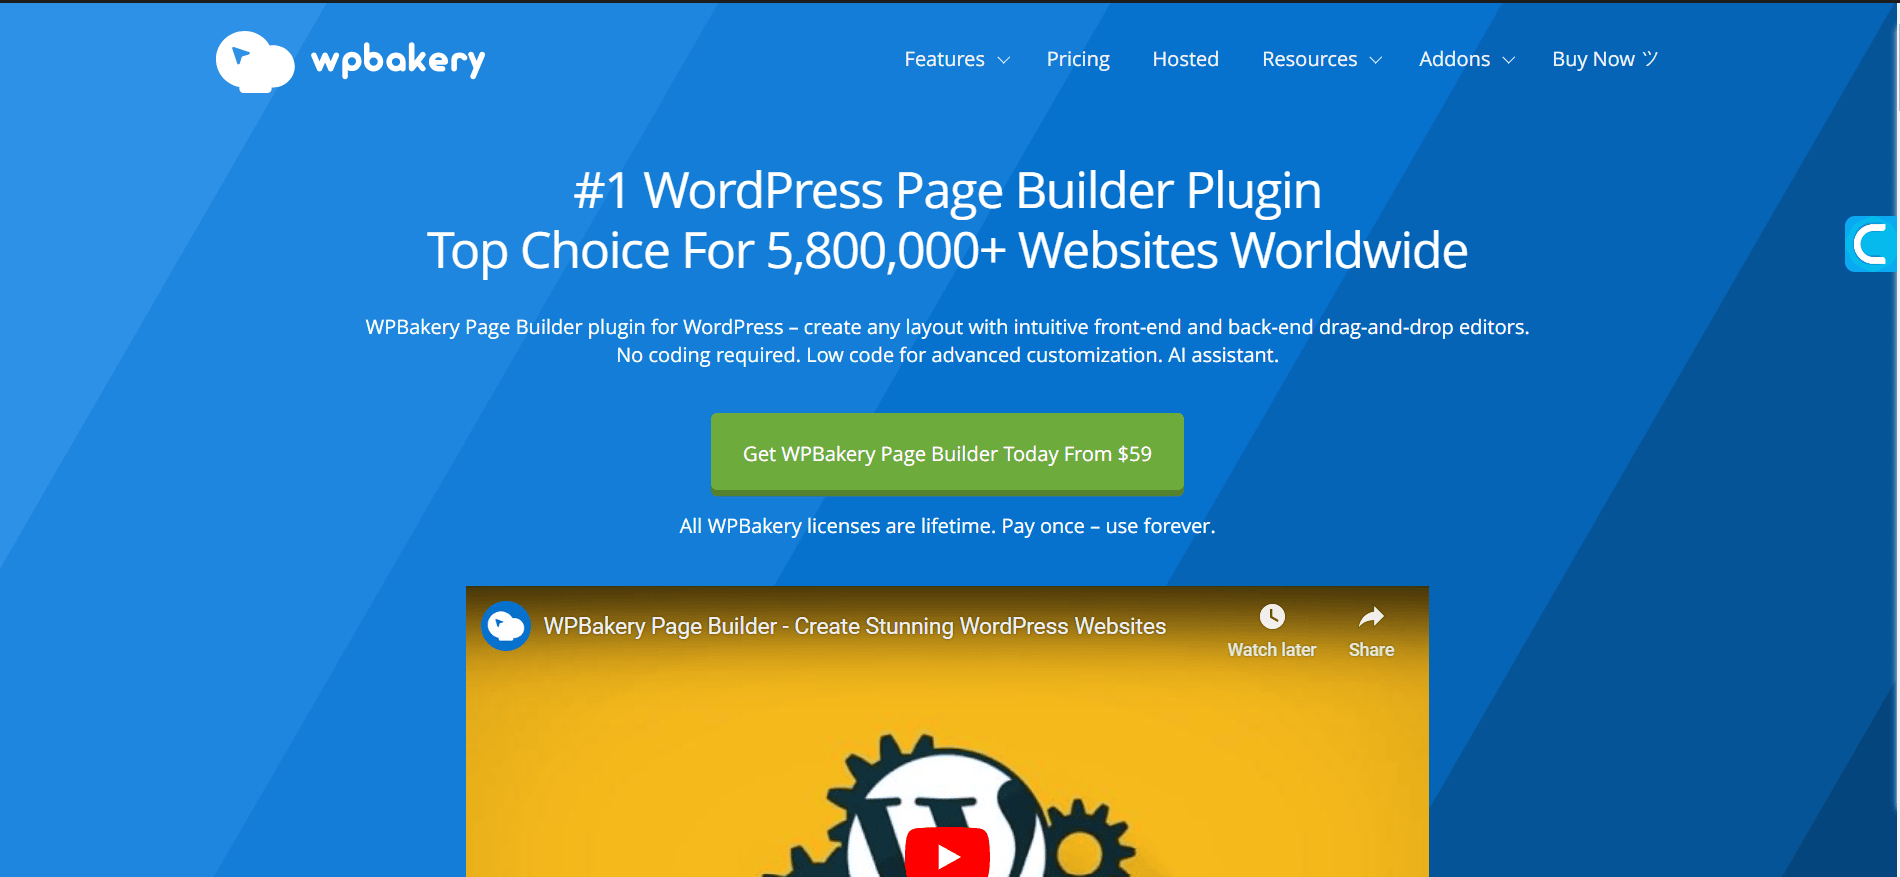 WPBakery Page Builder promotion displaying its title as the '#1 WordPress Page Builder Plugin' with pricing information, set against a blue background.